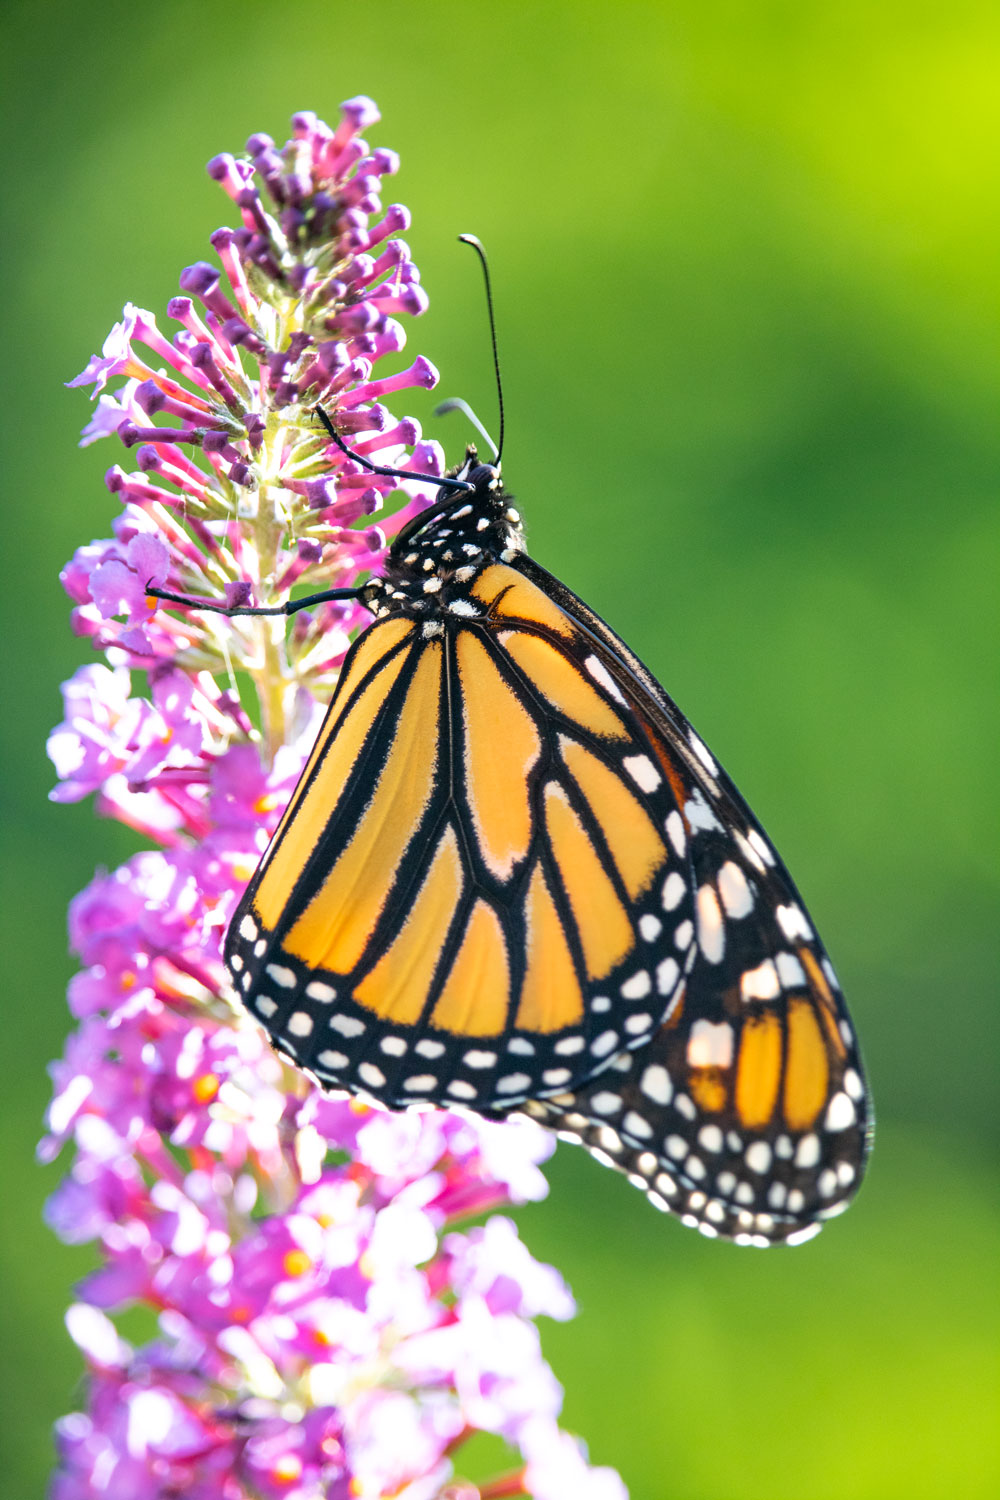 A Vertical View Of A Monarch Butterfly
